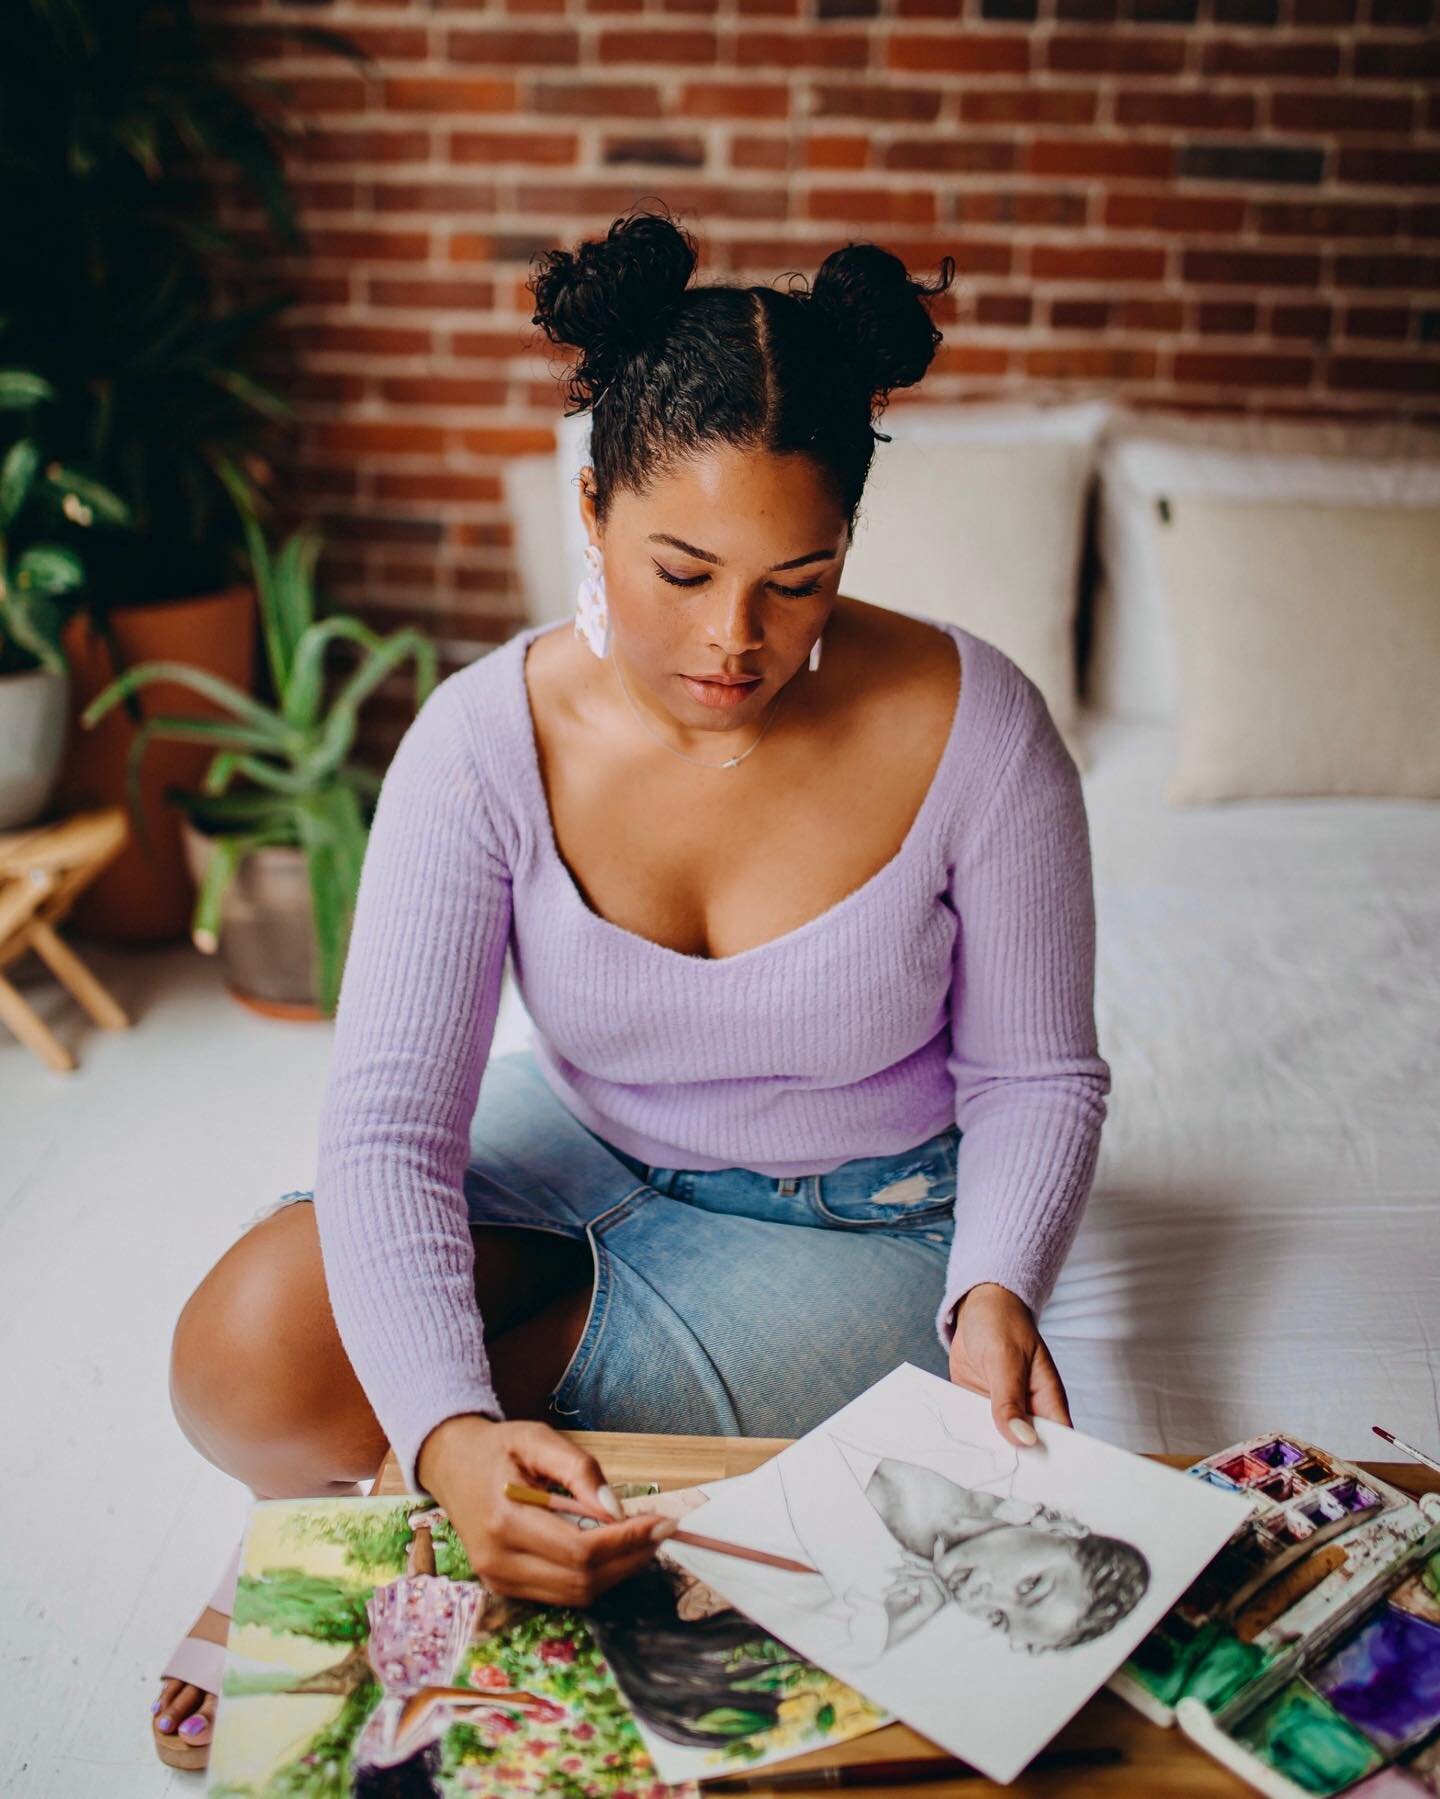 Space buns, fuzzy lilac sweaters and art are a winning combo 💜💟🎨
.
.
.
.
@kep_photos 📸 
.
.
.
.
.
.
.
.
.
#artistsoninstagram #artlovers #arts_help #art_realistic #art_promote #arts_promote #pencildrawing #portraitartist #artoftheweek #drawing_ex